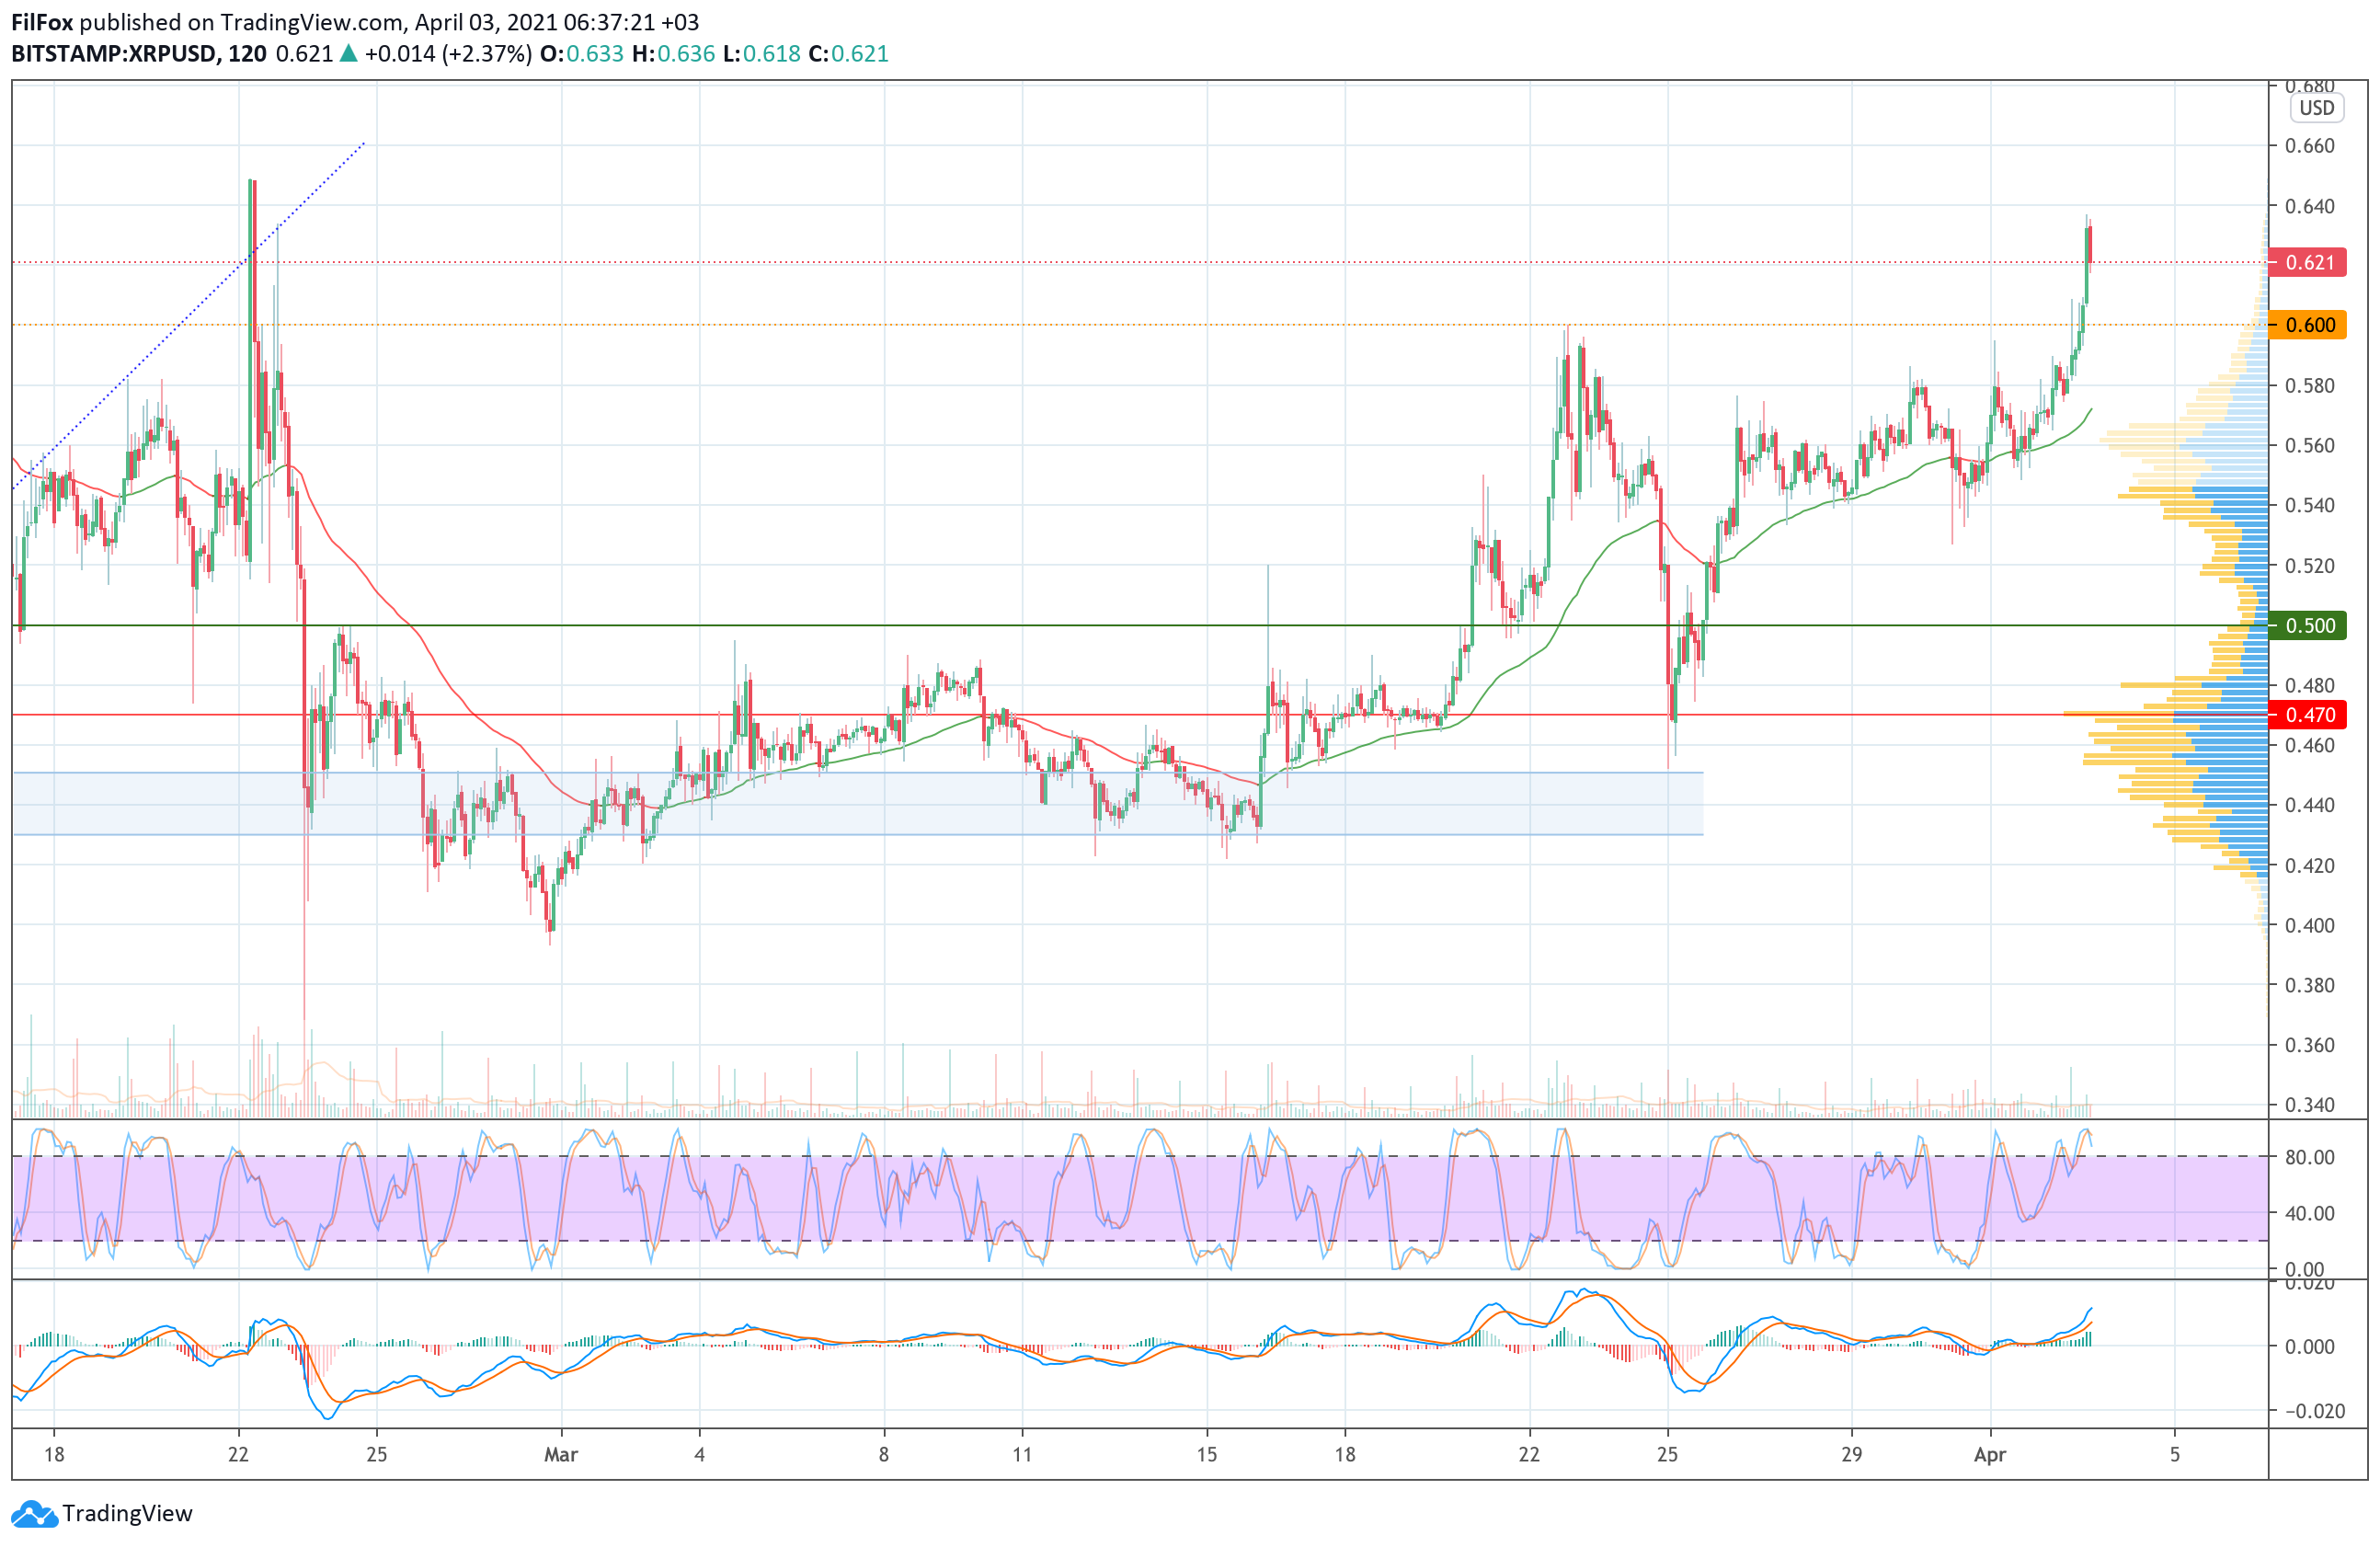 Analysis of the prices of Bitcoin, Ethereum, XRP for 04/03/2021